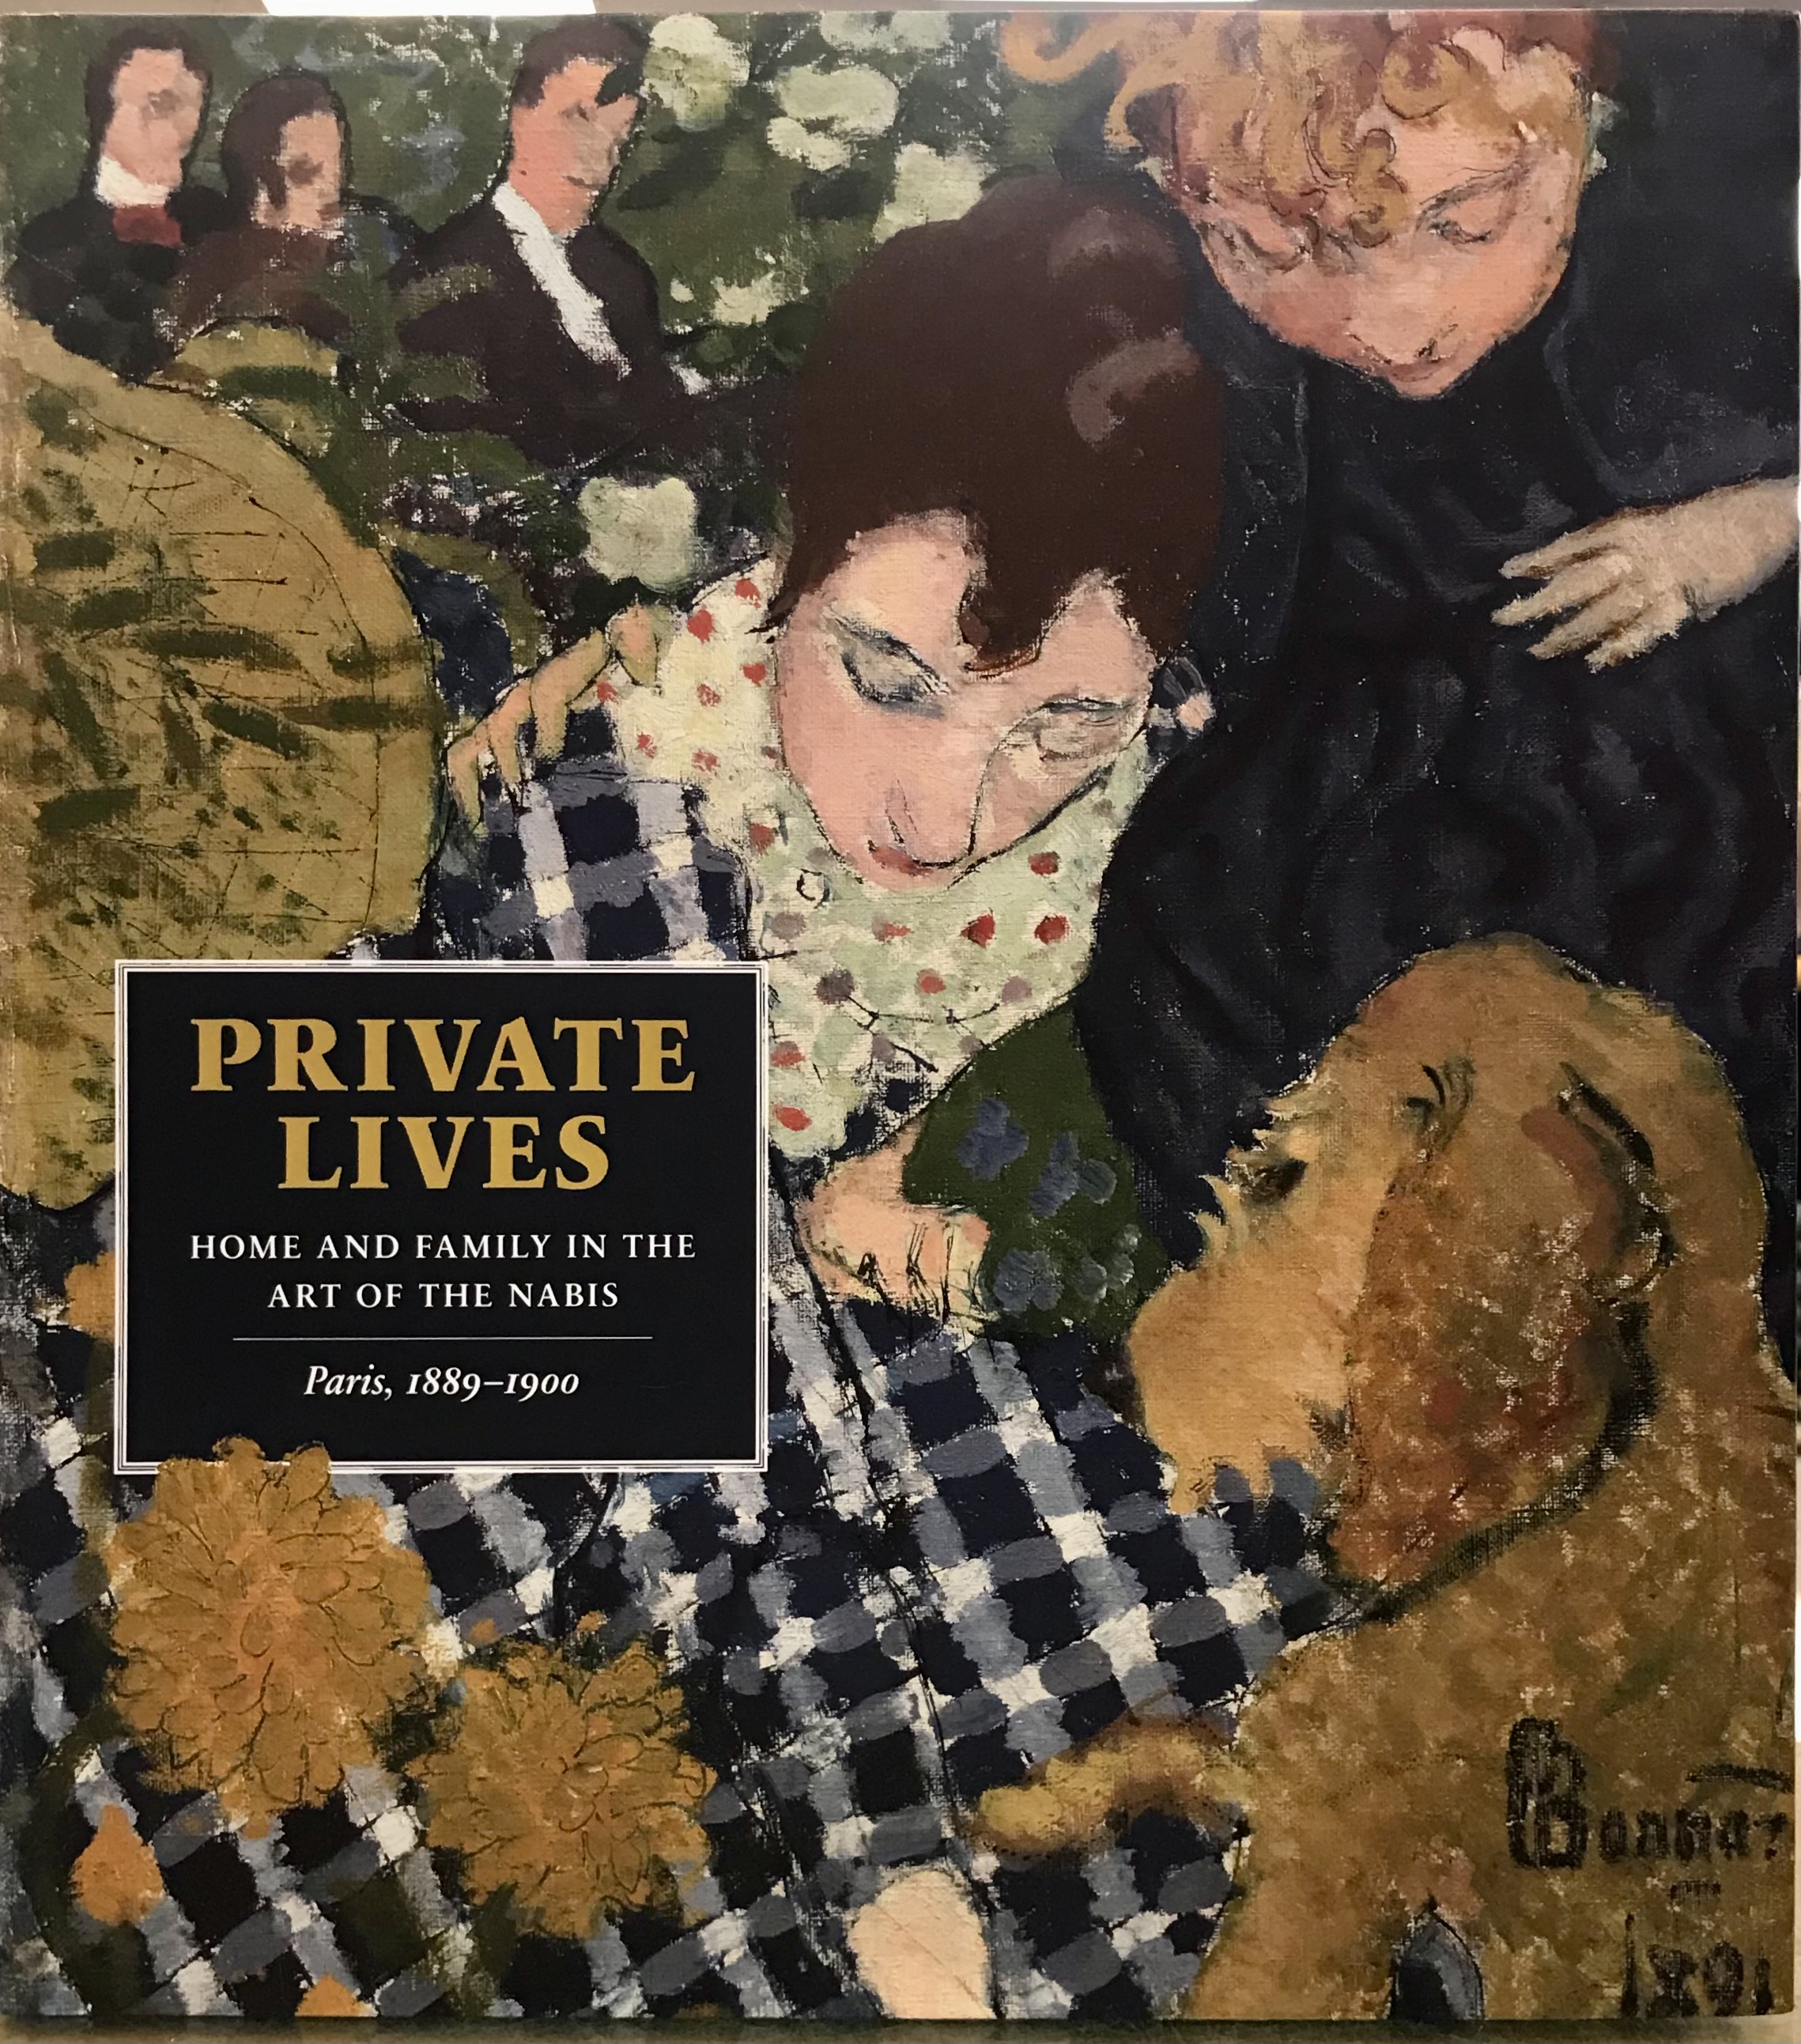 Private Lives: Home and Family in the Art of the Nabis, Paris, 1889-1900 - Chapin, Mary Weaver & Brown, Heather Lemonedes